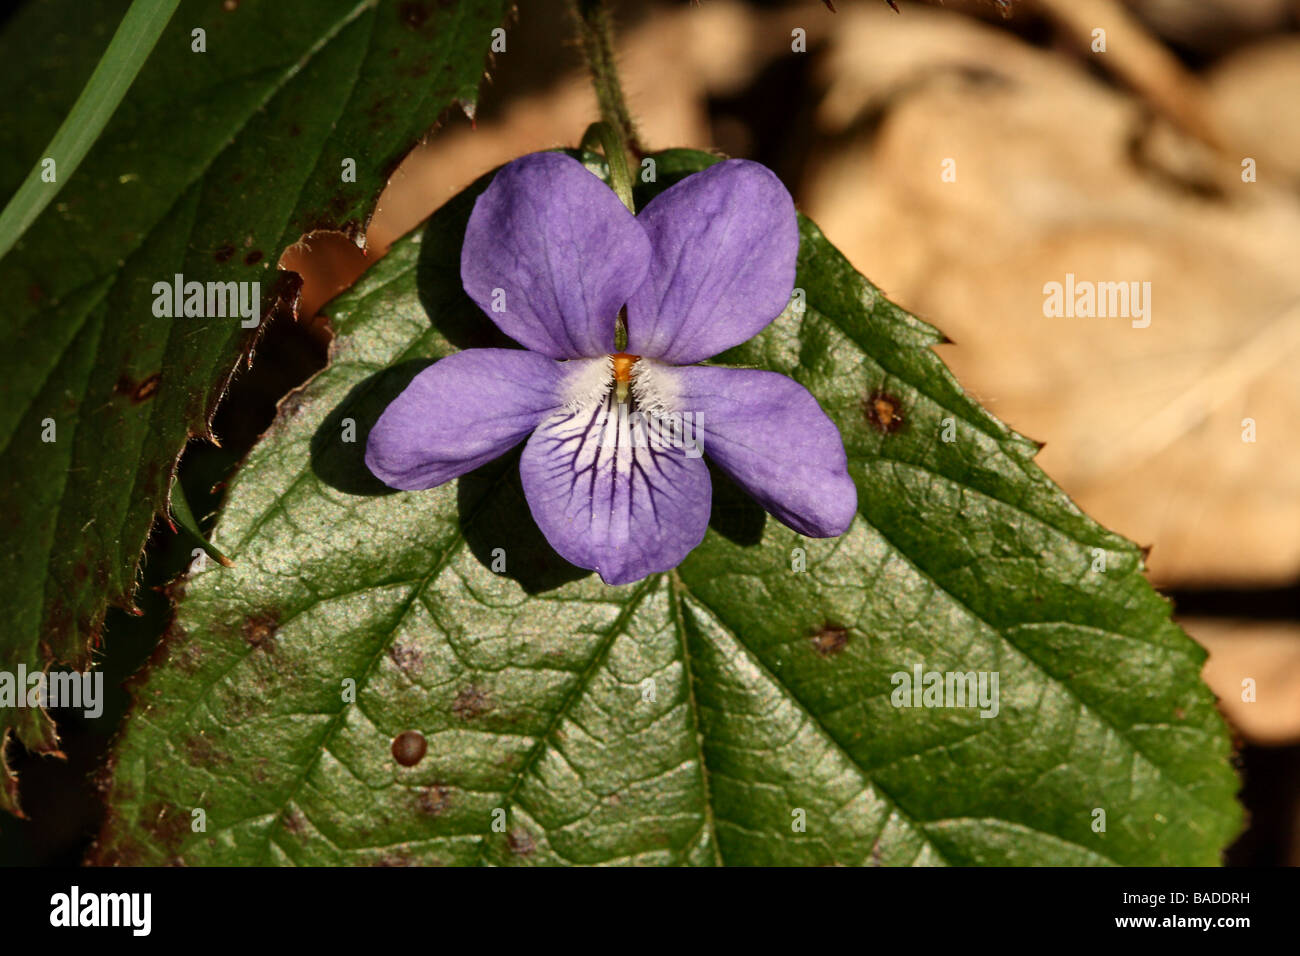 Common Dog Violet Viola riviniana Family Violaceae flower structure in detail Canon 100mm macro 1:1 Stock Photo